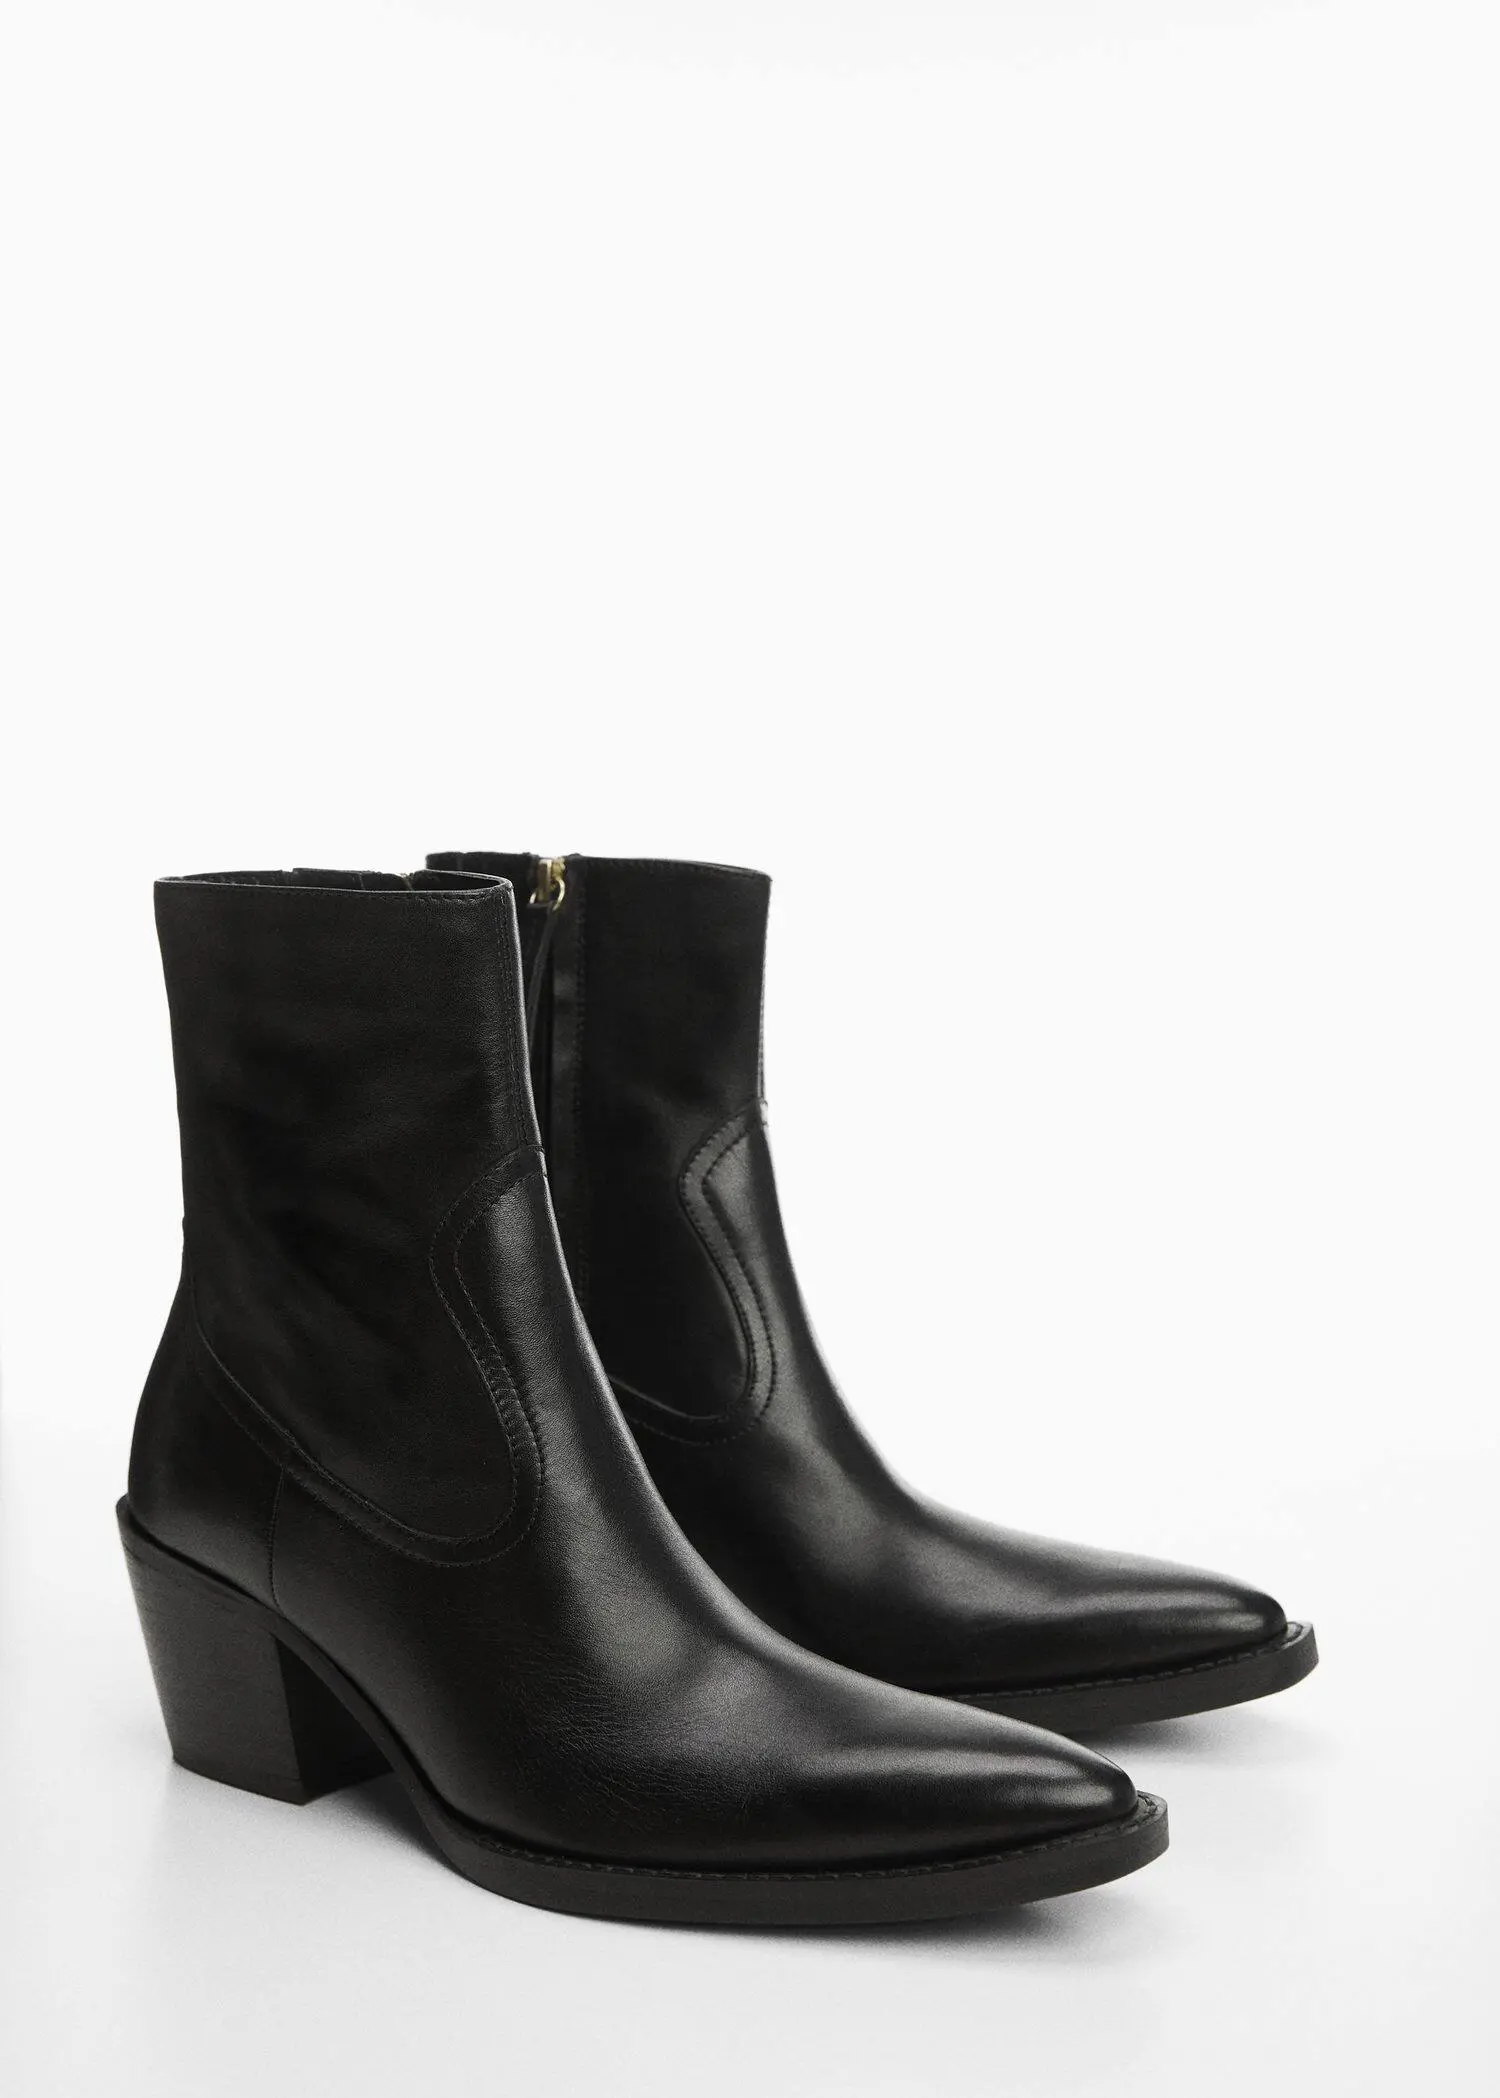 Mango Leather pointed ankle boots. 3